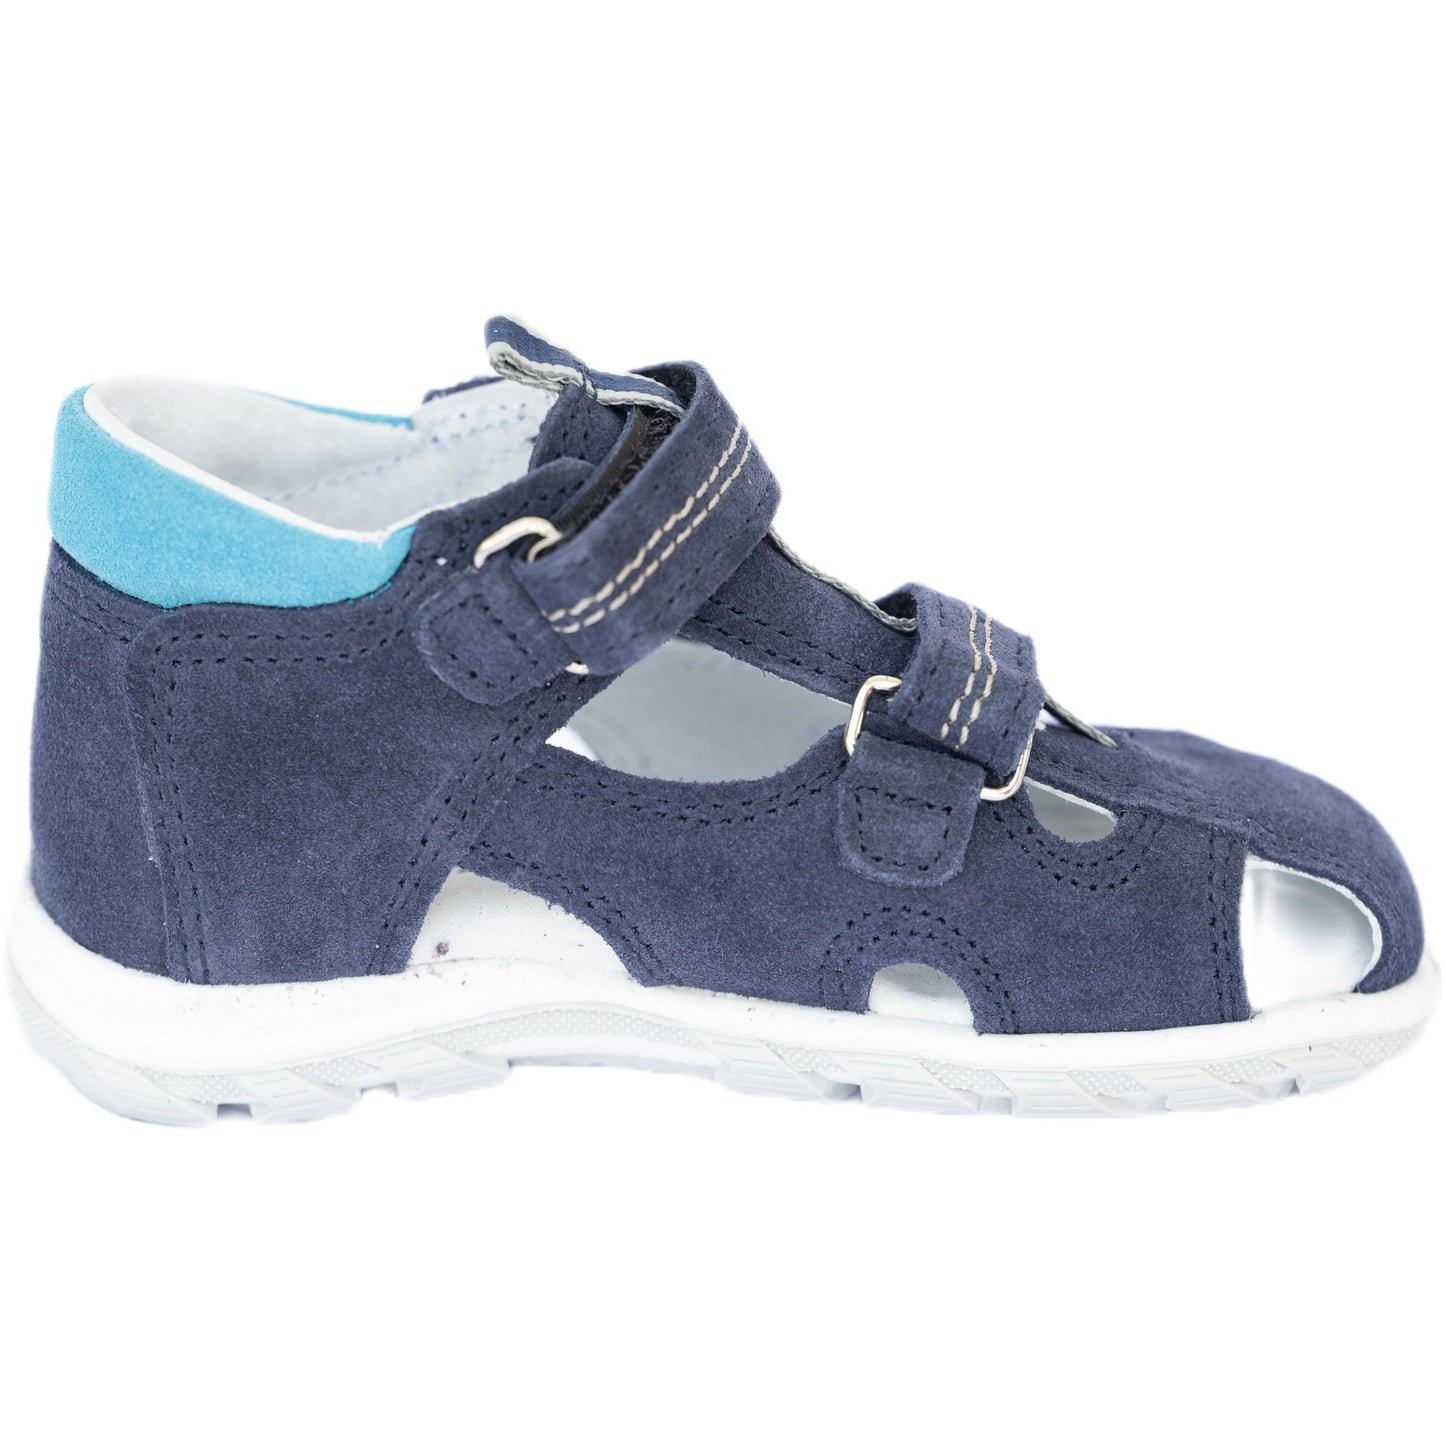 orthopedic toddler boy sandals: T102: color blue turquoise - feelgoodshoes.ae